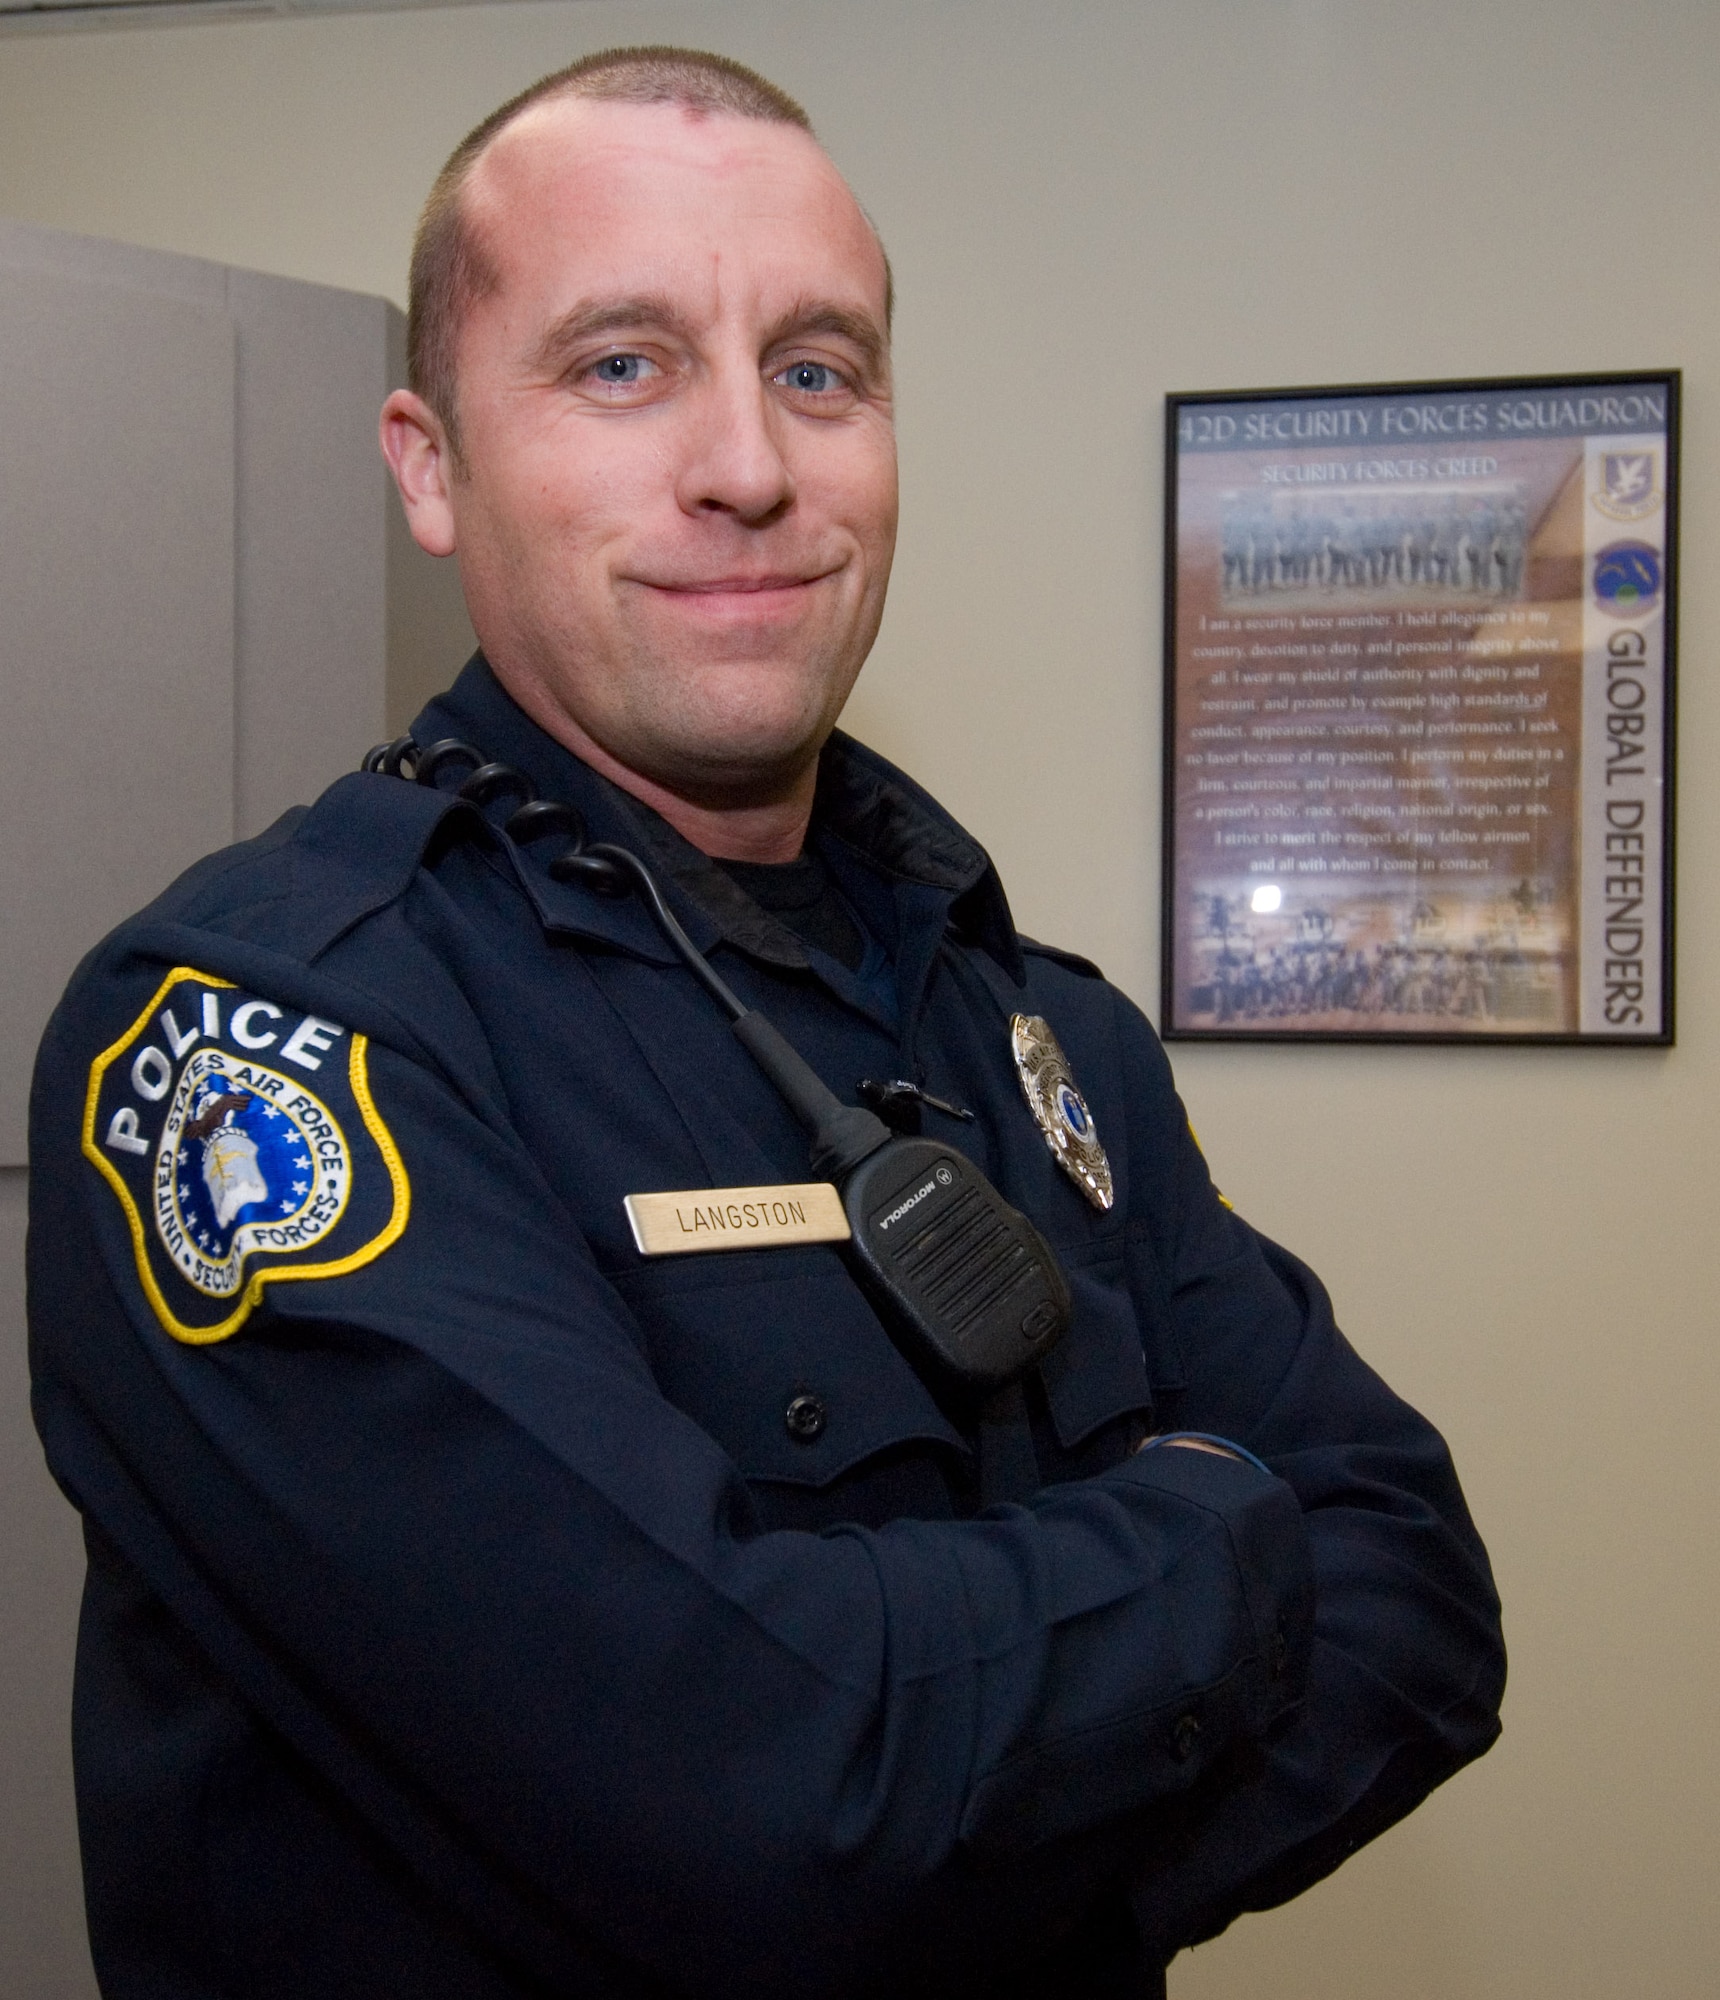 Chris Langston is the first of 35 Department of Defense police officers to be assigned to Maxwell Air Force Base. All 35 officers are scheduled to arrive by October 2009. (Air Force photo by Jamie Pitcher)